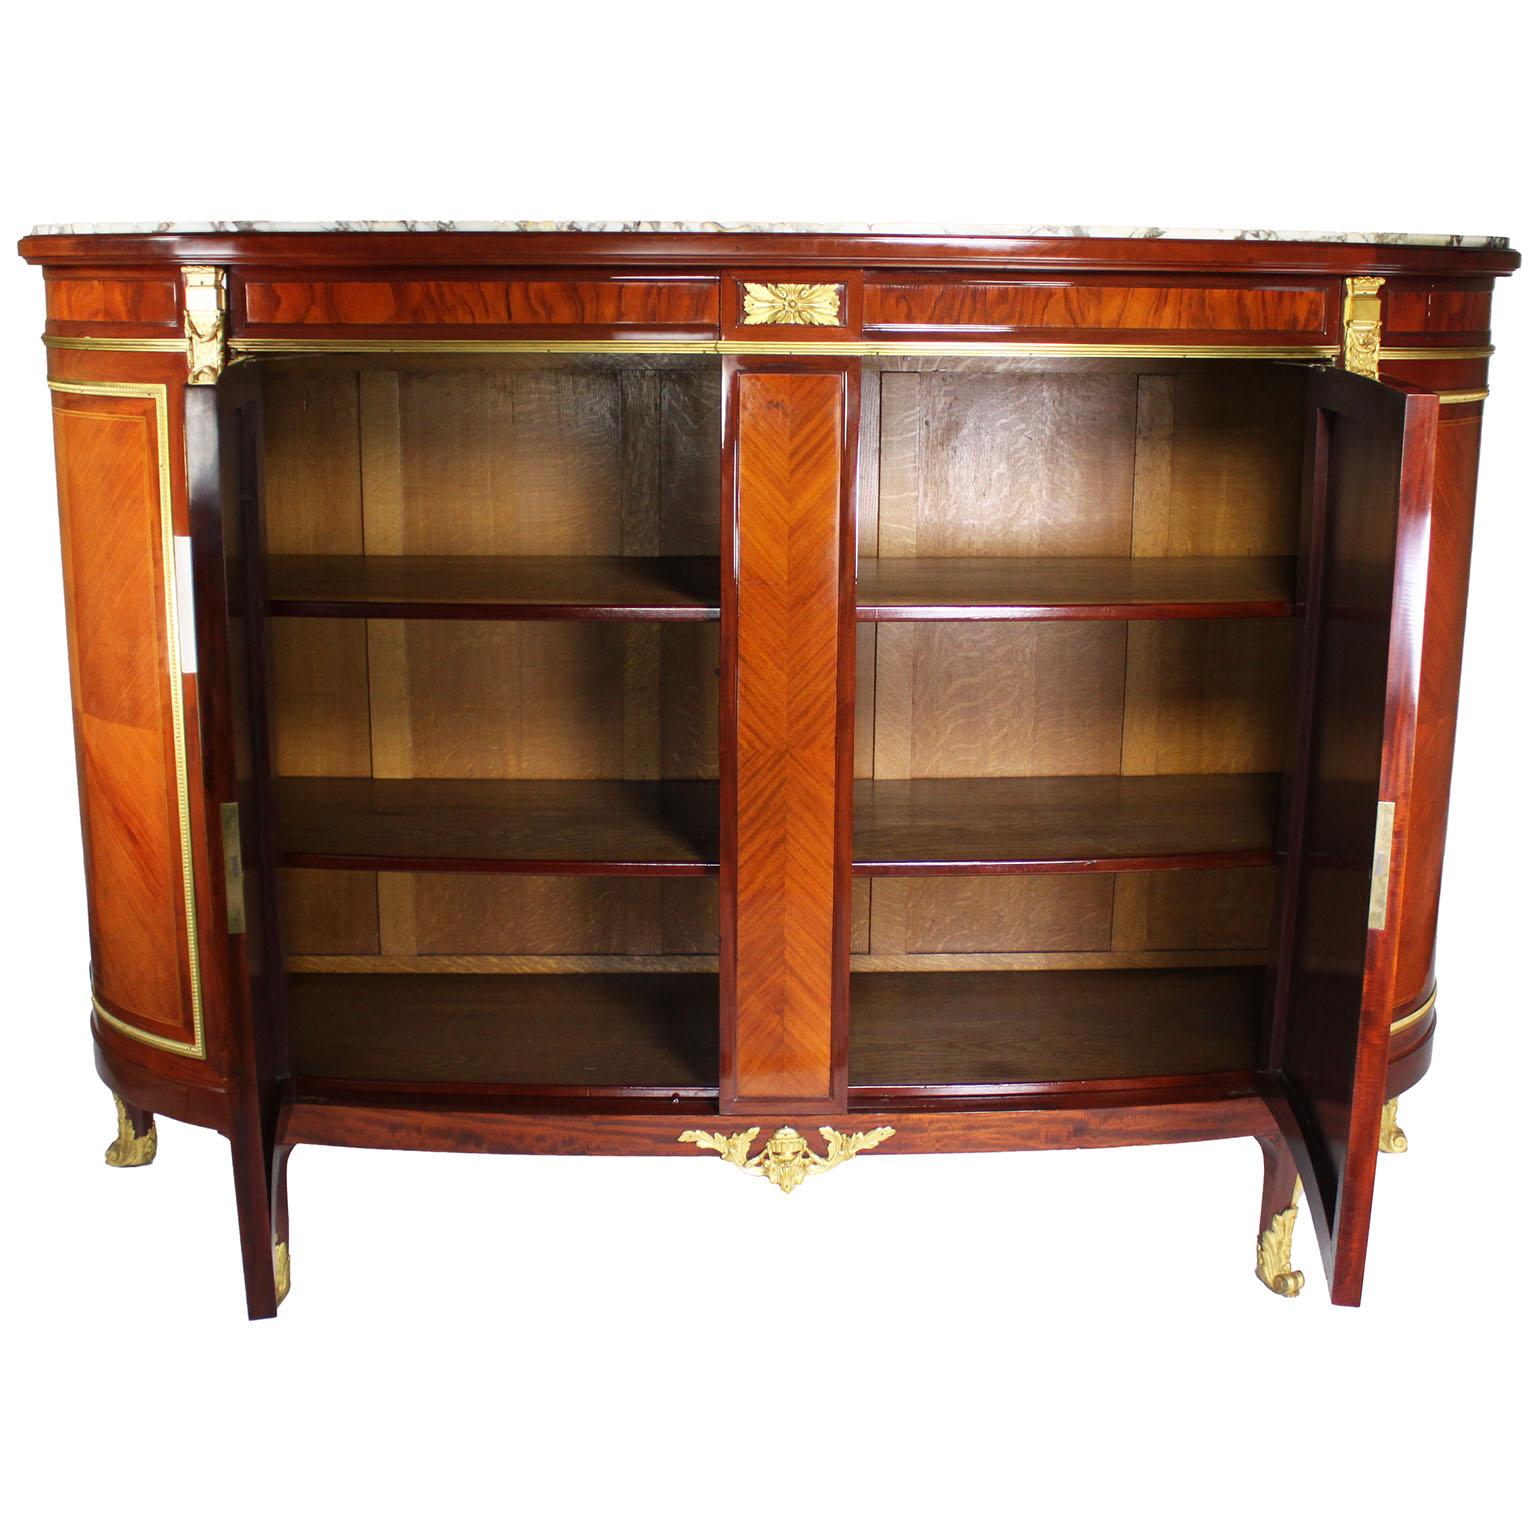 French 19th-20th C. Louis XV Style Mahogany Ormolu Mounted Buffet Server Cabinet For Sale 1